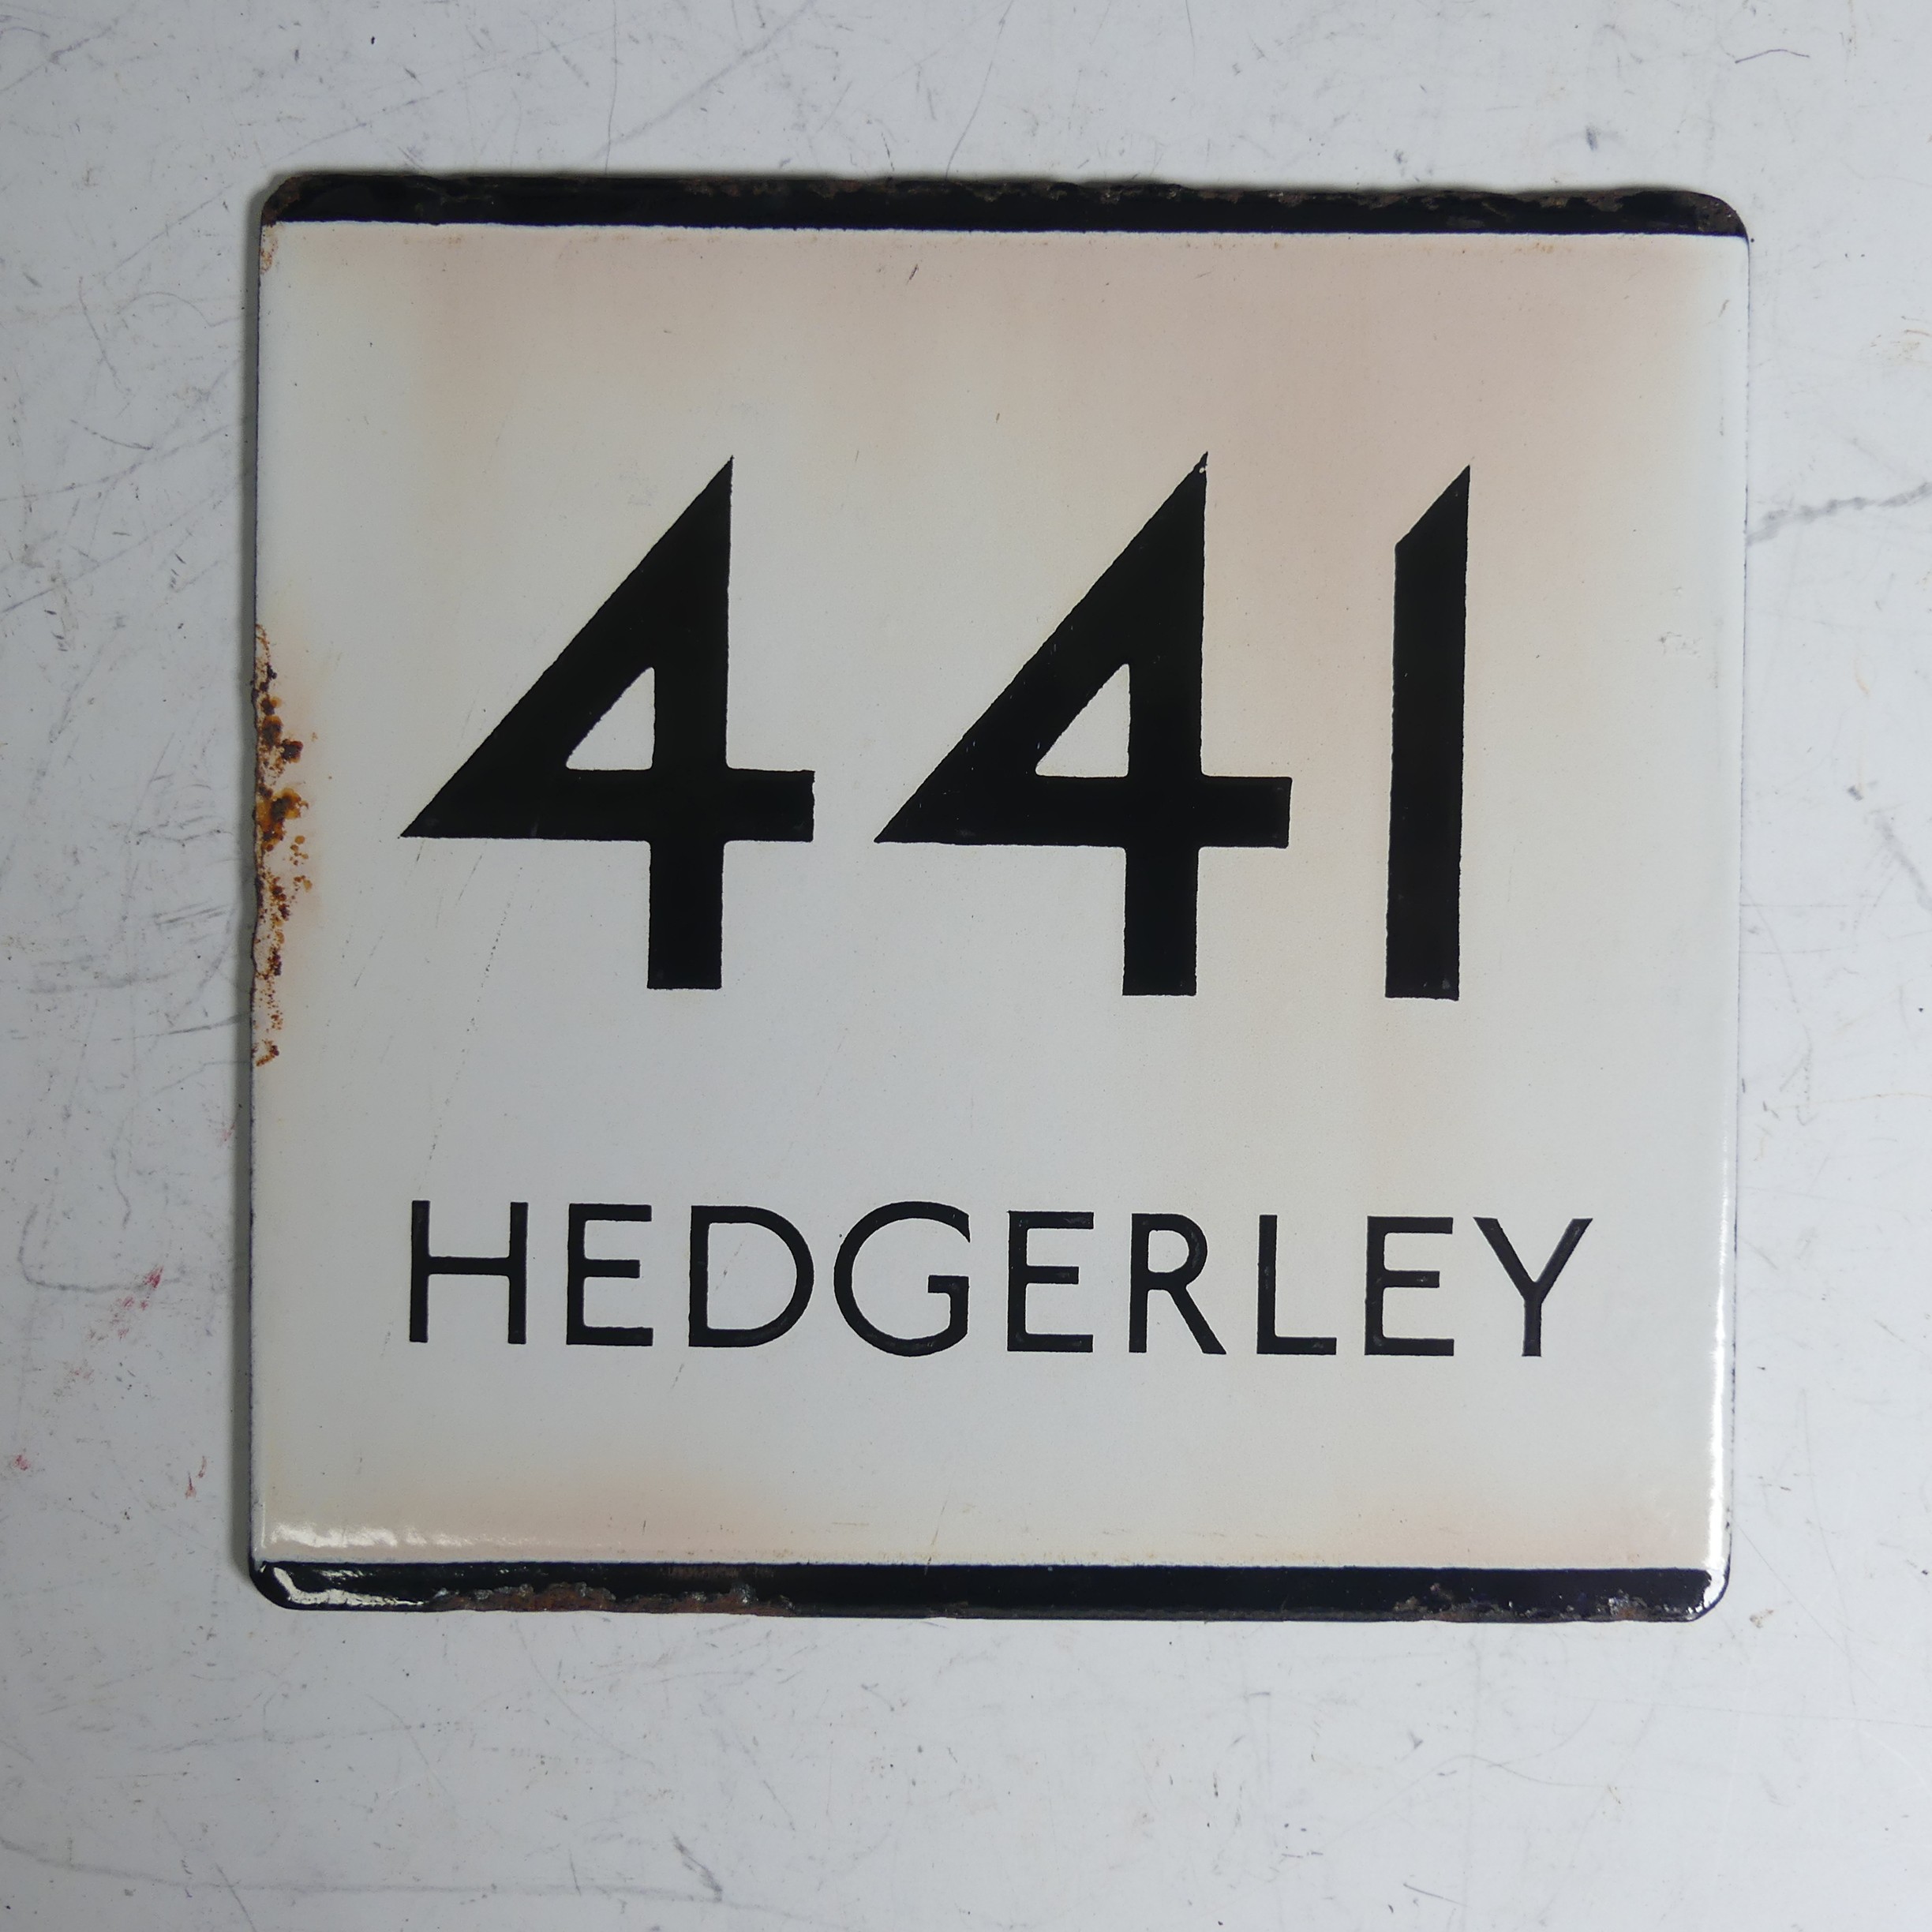 Bus and Coaching Memorabilia; A London Transport enamel Bus Stop E-Plate, Route No. 441 with